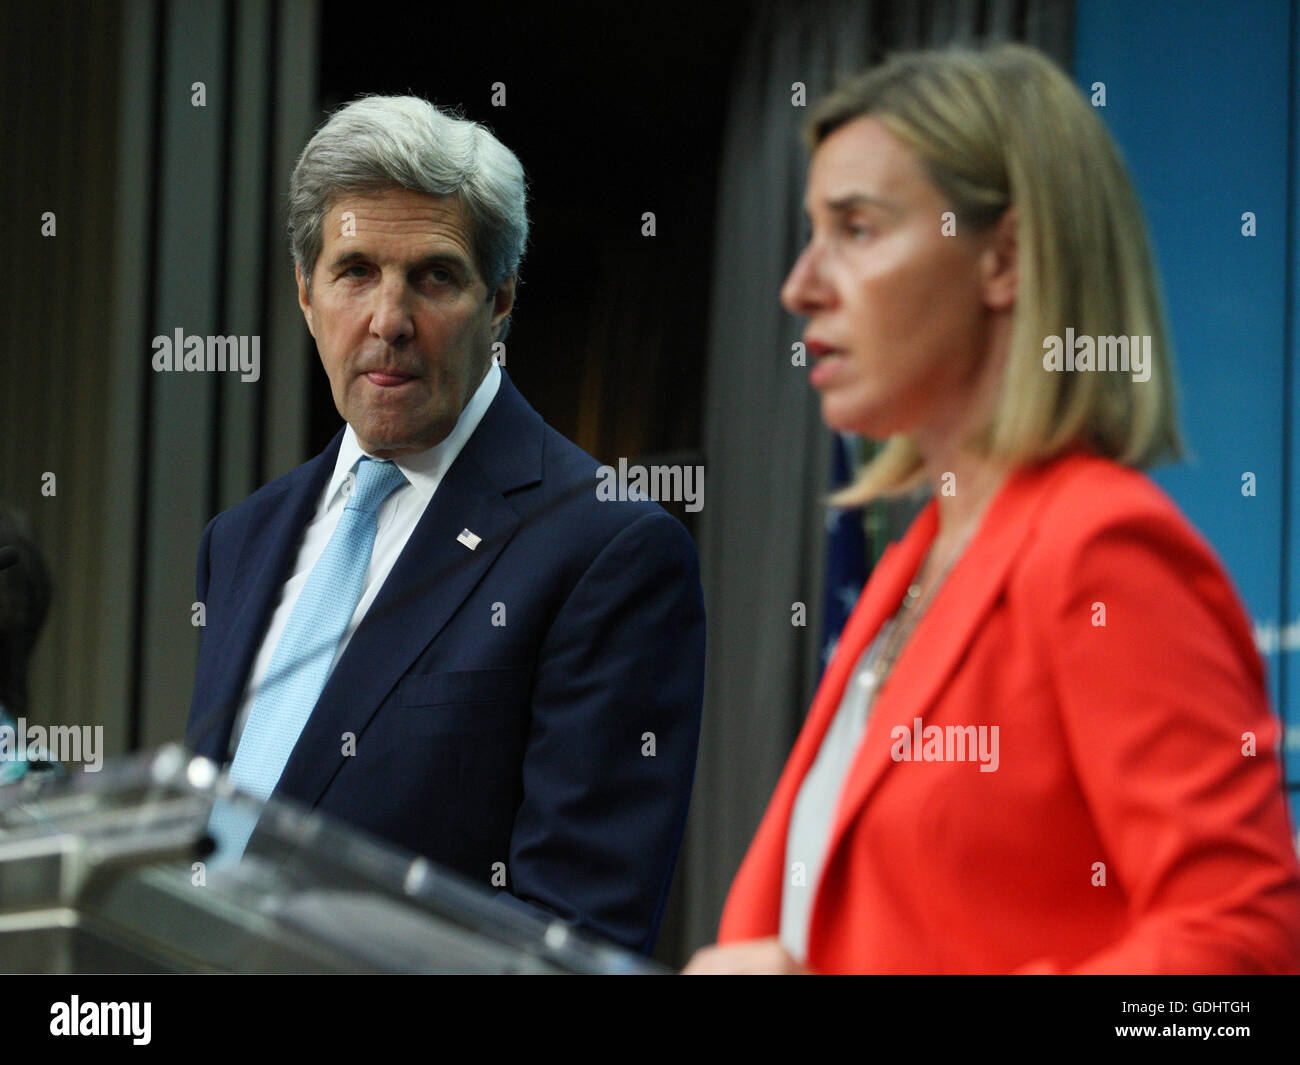 Brussels, Belgium. 18th July, 2016. U.S Secretary of Statet John Kerry and the High Representantive for Foreing Affairs and Security Policy Minister Federica Mogherini during the press conference. Credit:  Leonardo Hugo Cavallo/Alamy Live News Stock Photo